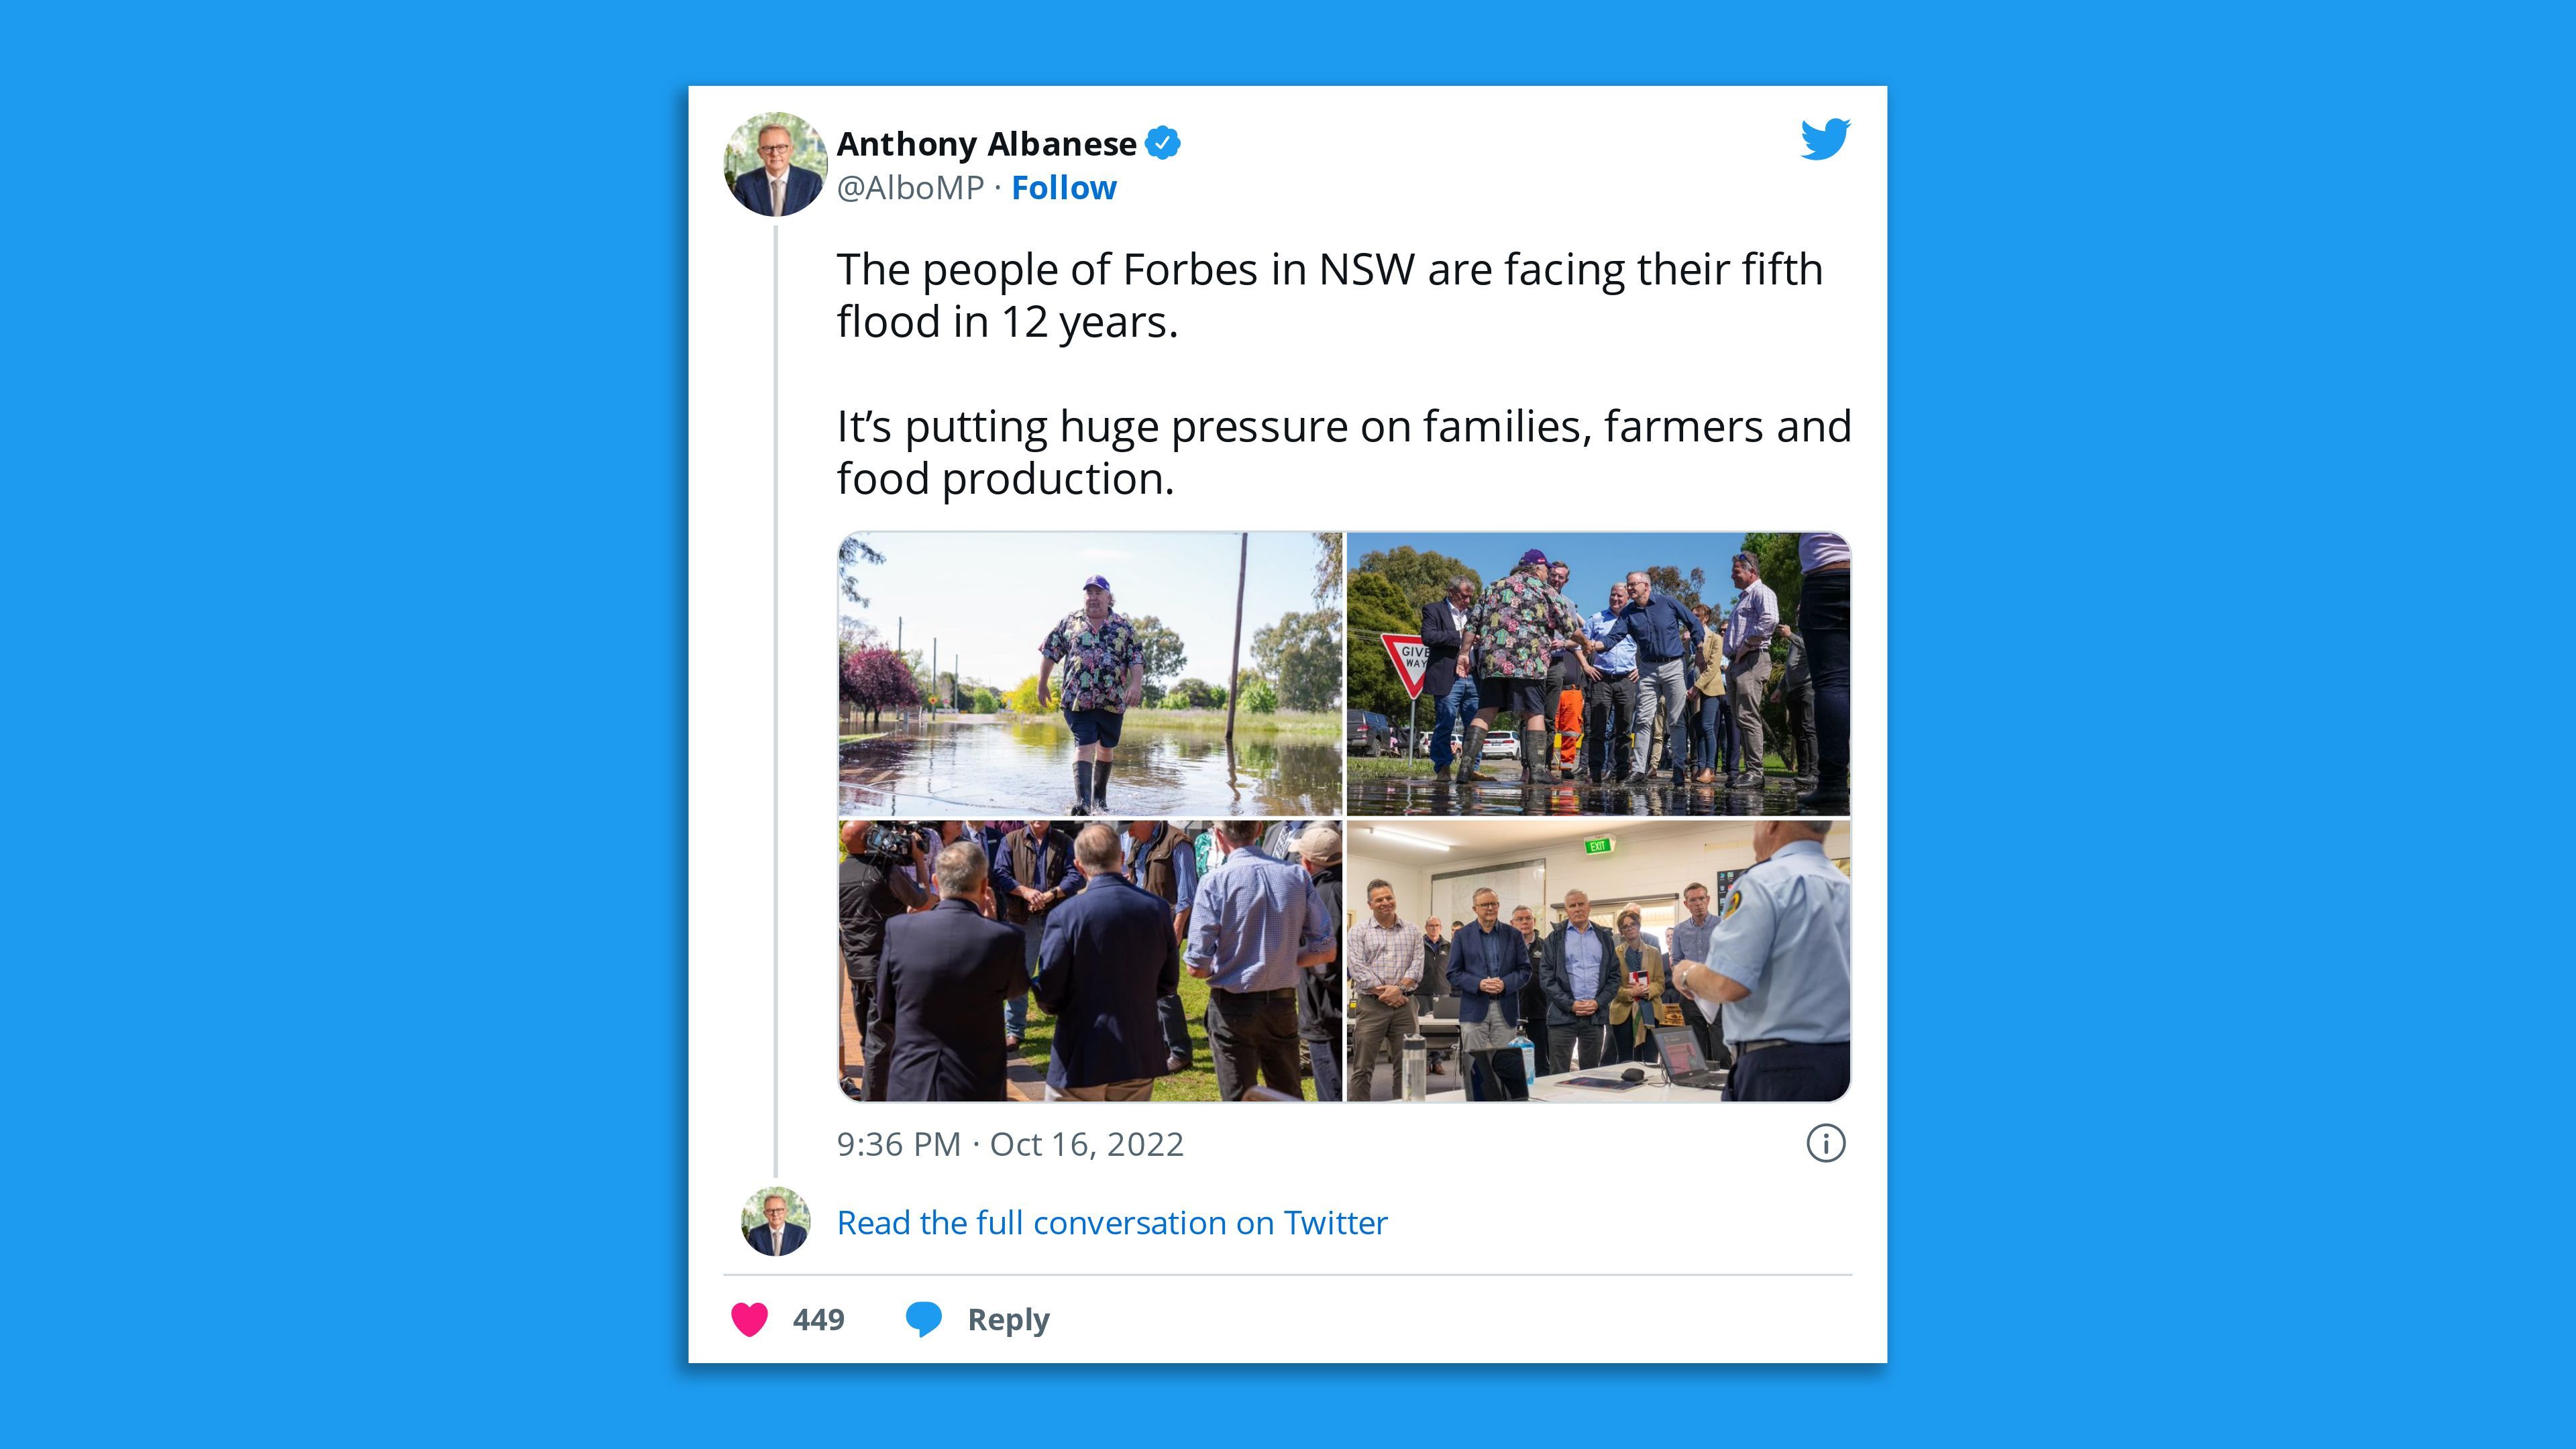 Australian Prime Minister Anthony Albanese notes in a tweet that Forbes, New South Wales, has been hit by flooding five years in a row.